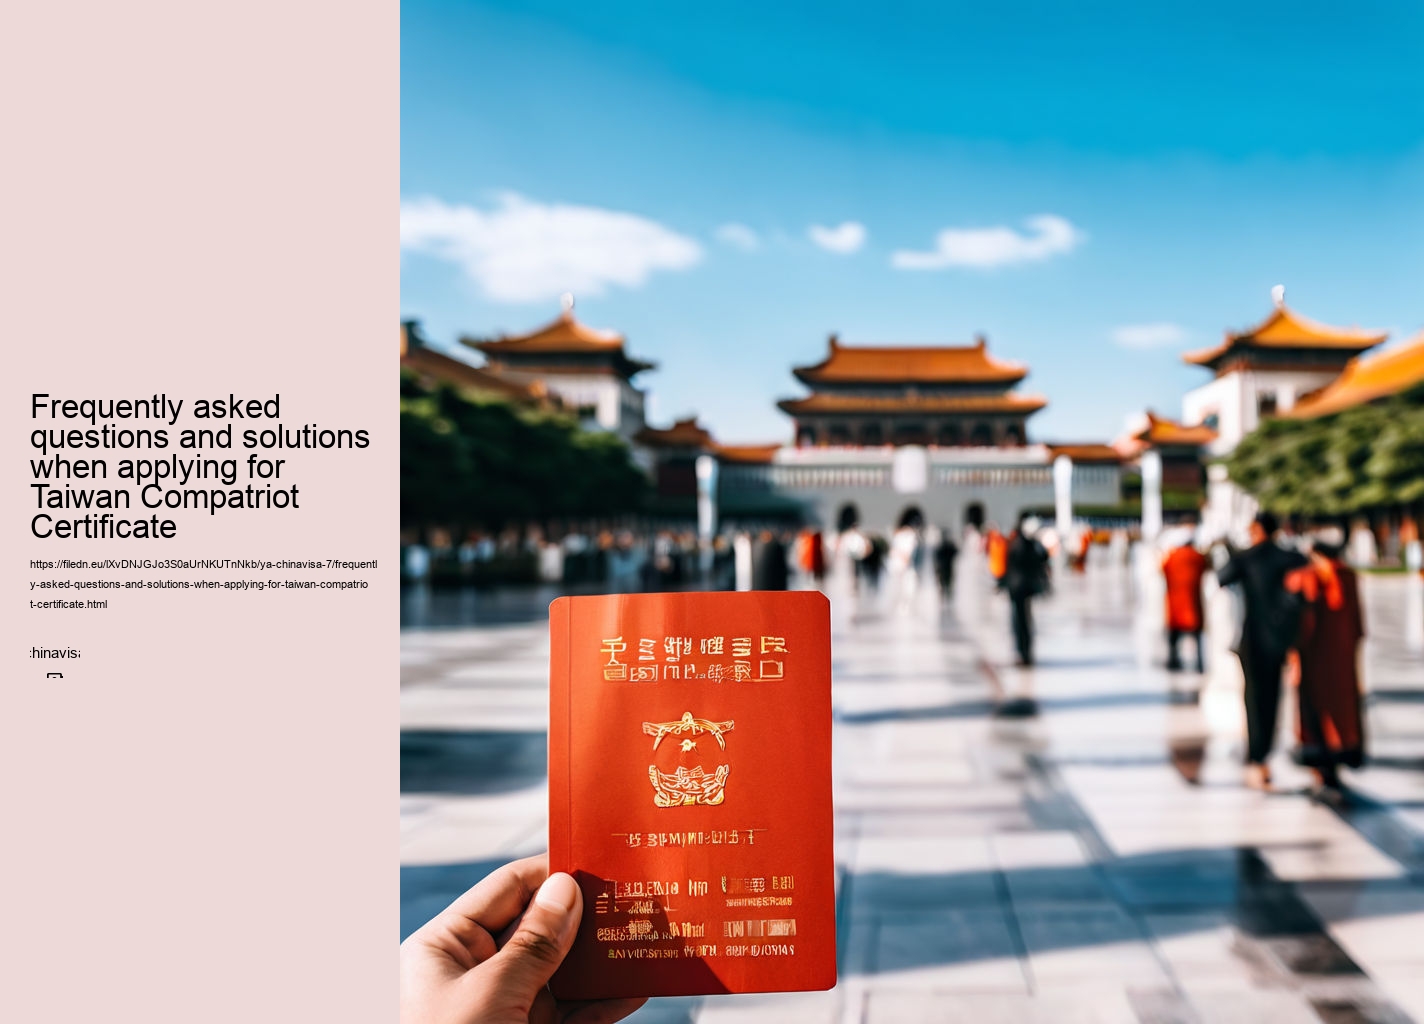 Frequently asked questions and solutions when applying for Taiwan Compatriot Certificate